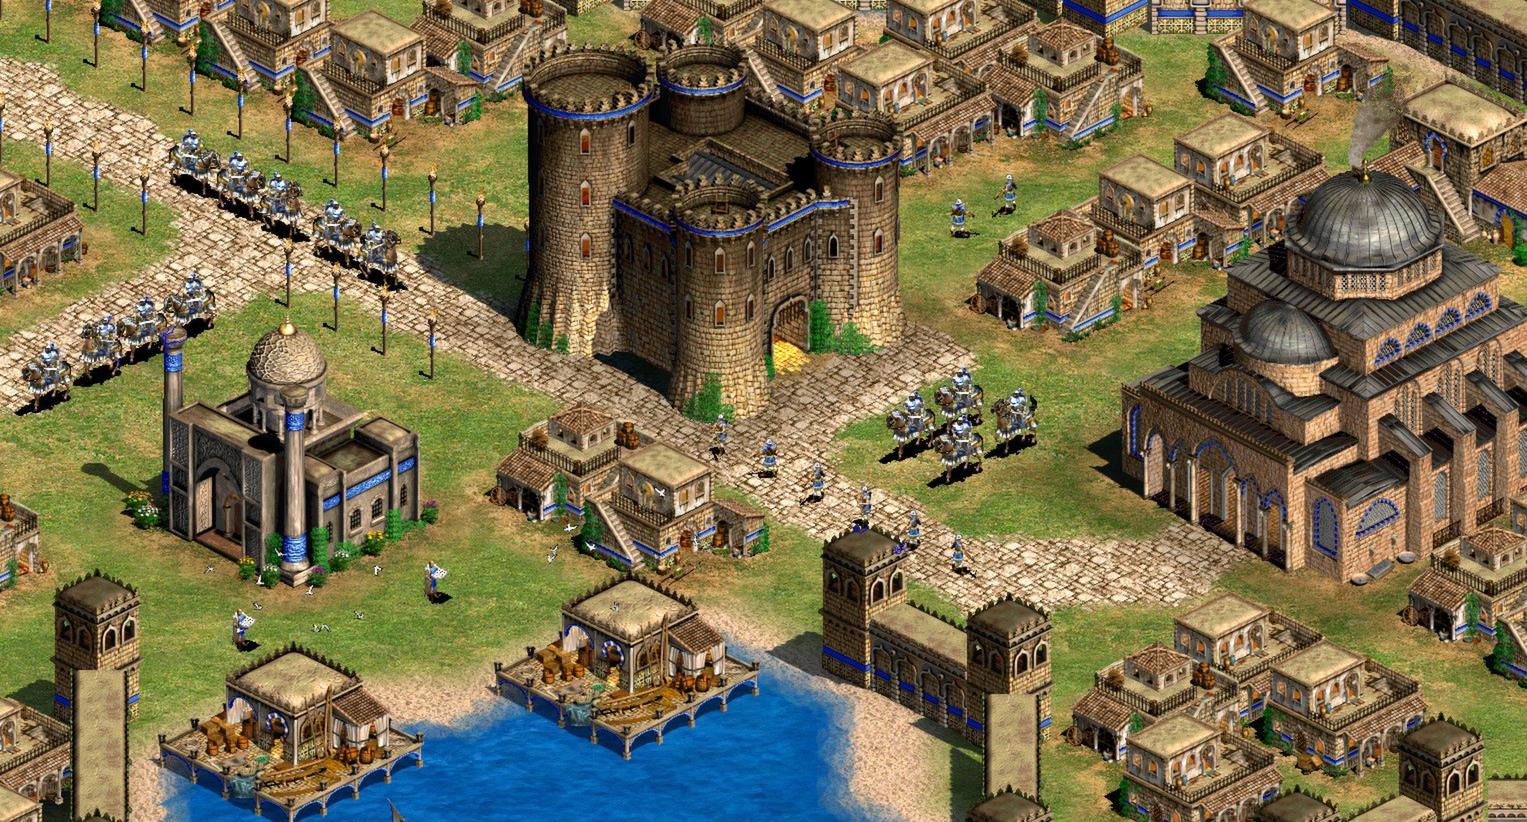 age of empires 2 texture pack